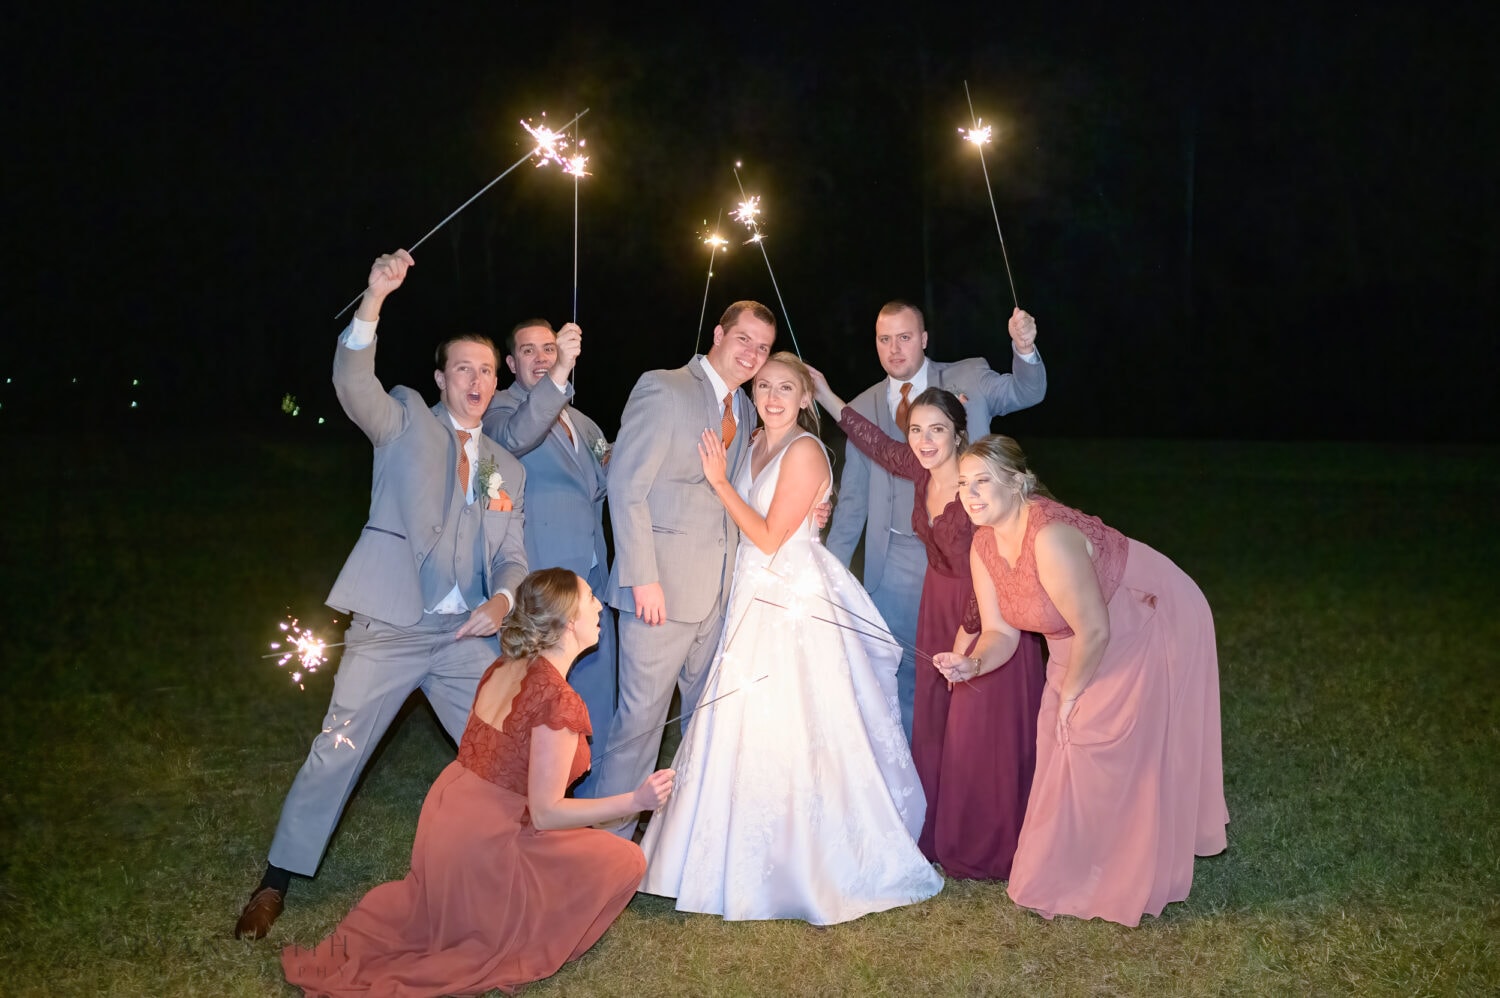 Holding sparklers around the bride and groom - The Blessed Barn